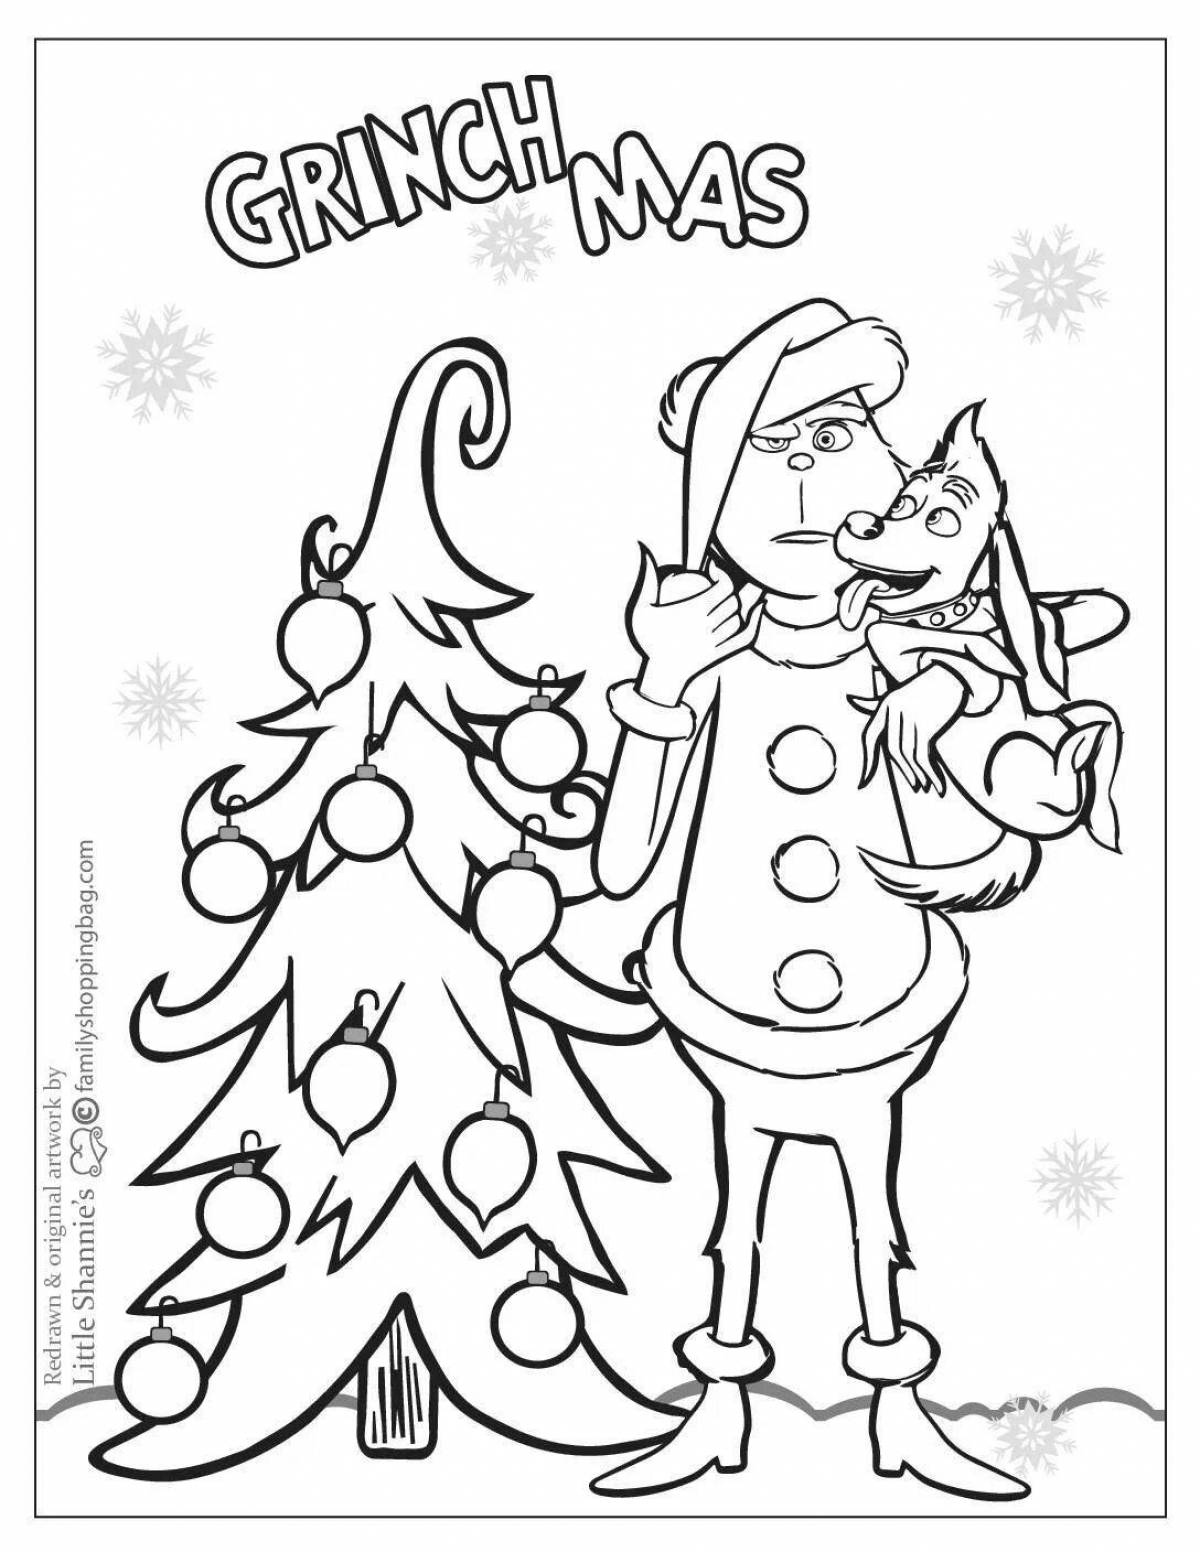 Cute grinch coloring for kids